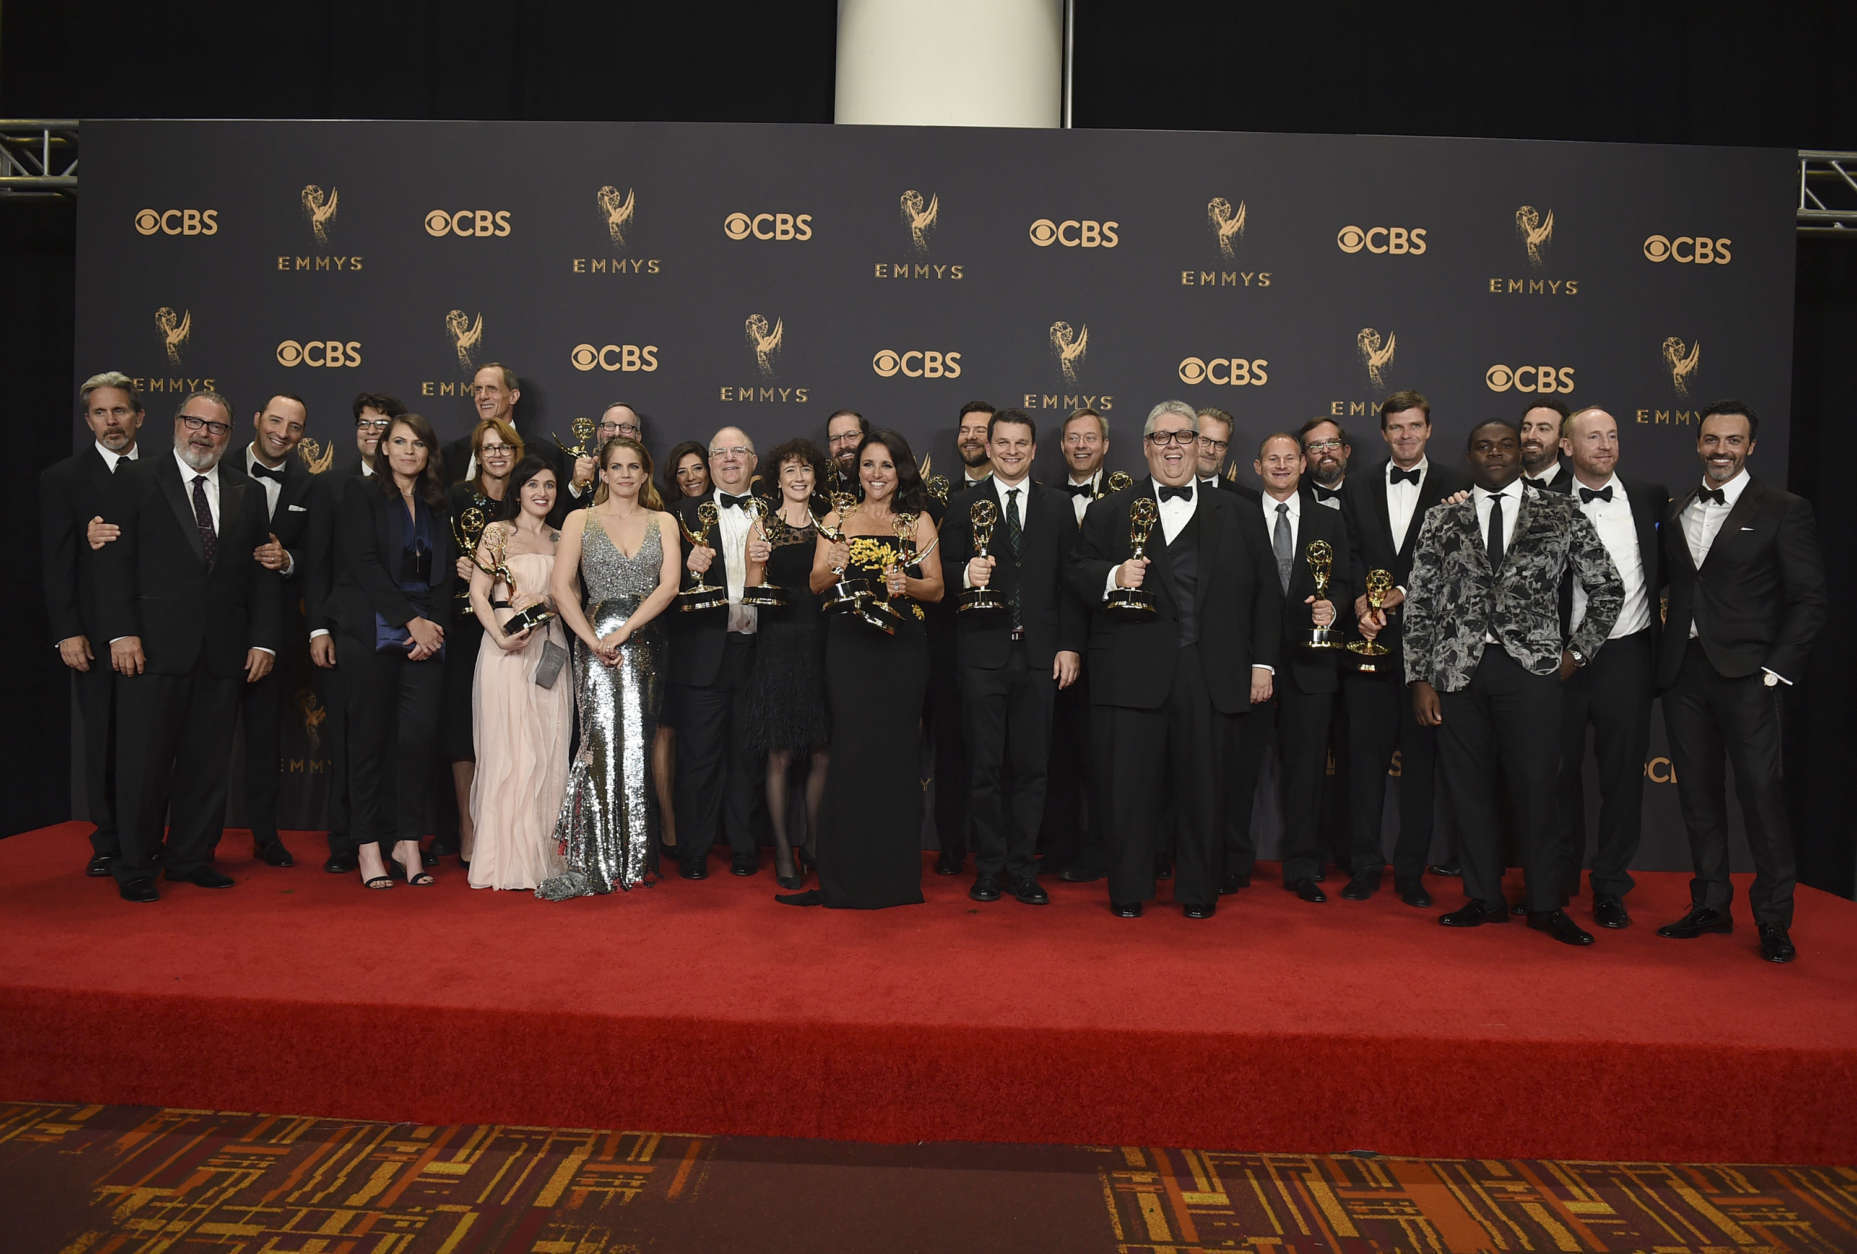 The cast and crew of "Veep" pose in the press room with the award for outstanding comedy series at the 69th Primetime Emmy Awards on Sunday, Sept. 17, 2017, at the Microsoft Theater in Los Angeles. (Photo by Jordan Strauss/Invision/AP)